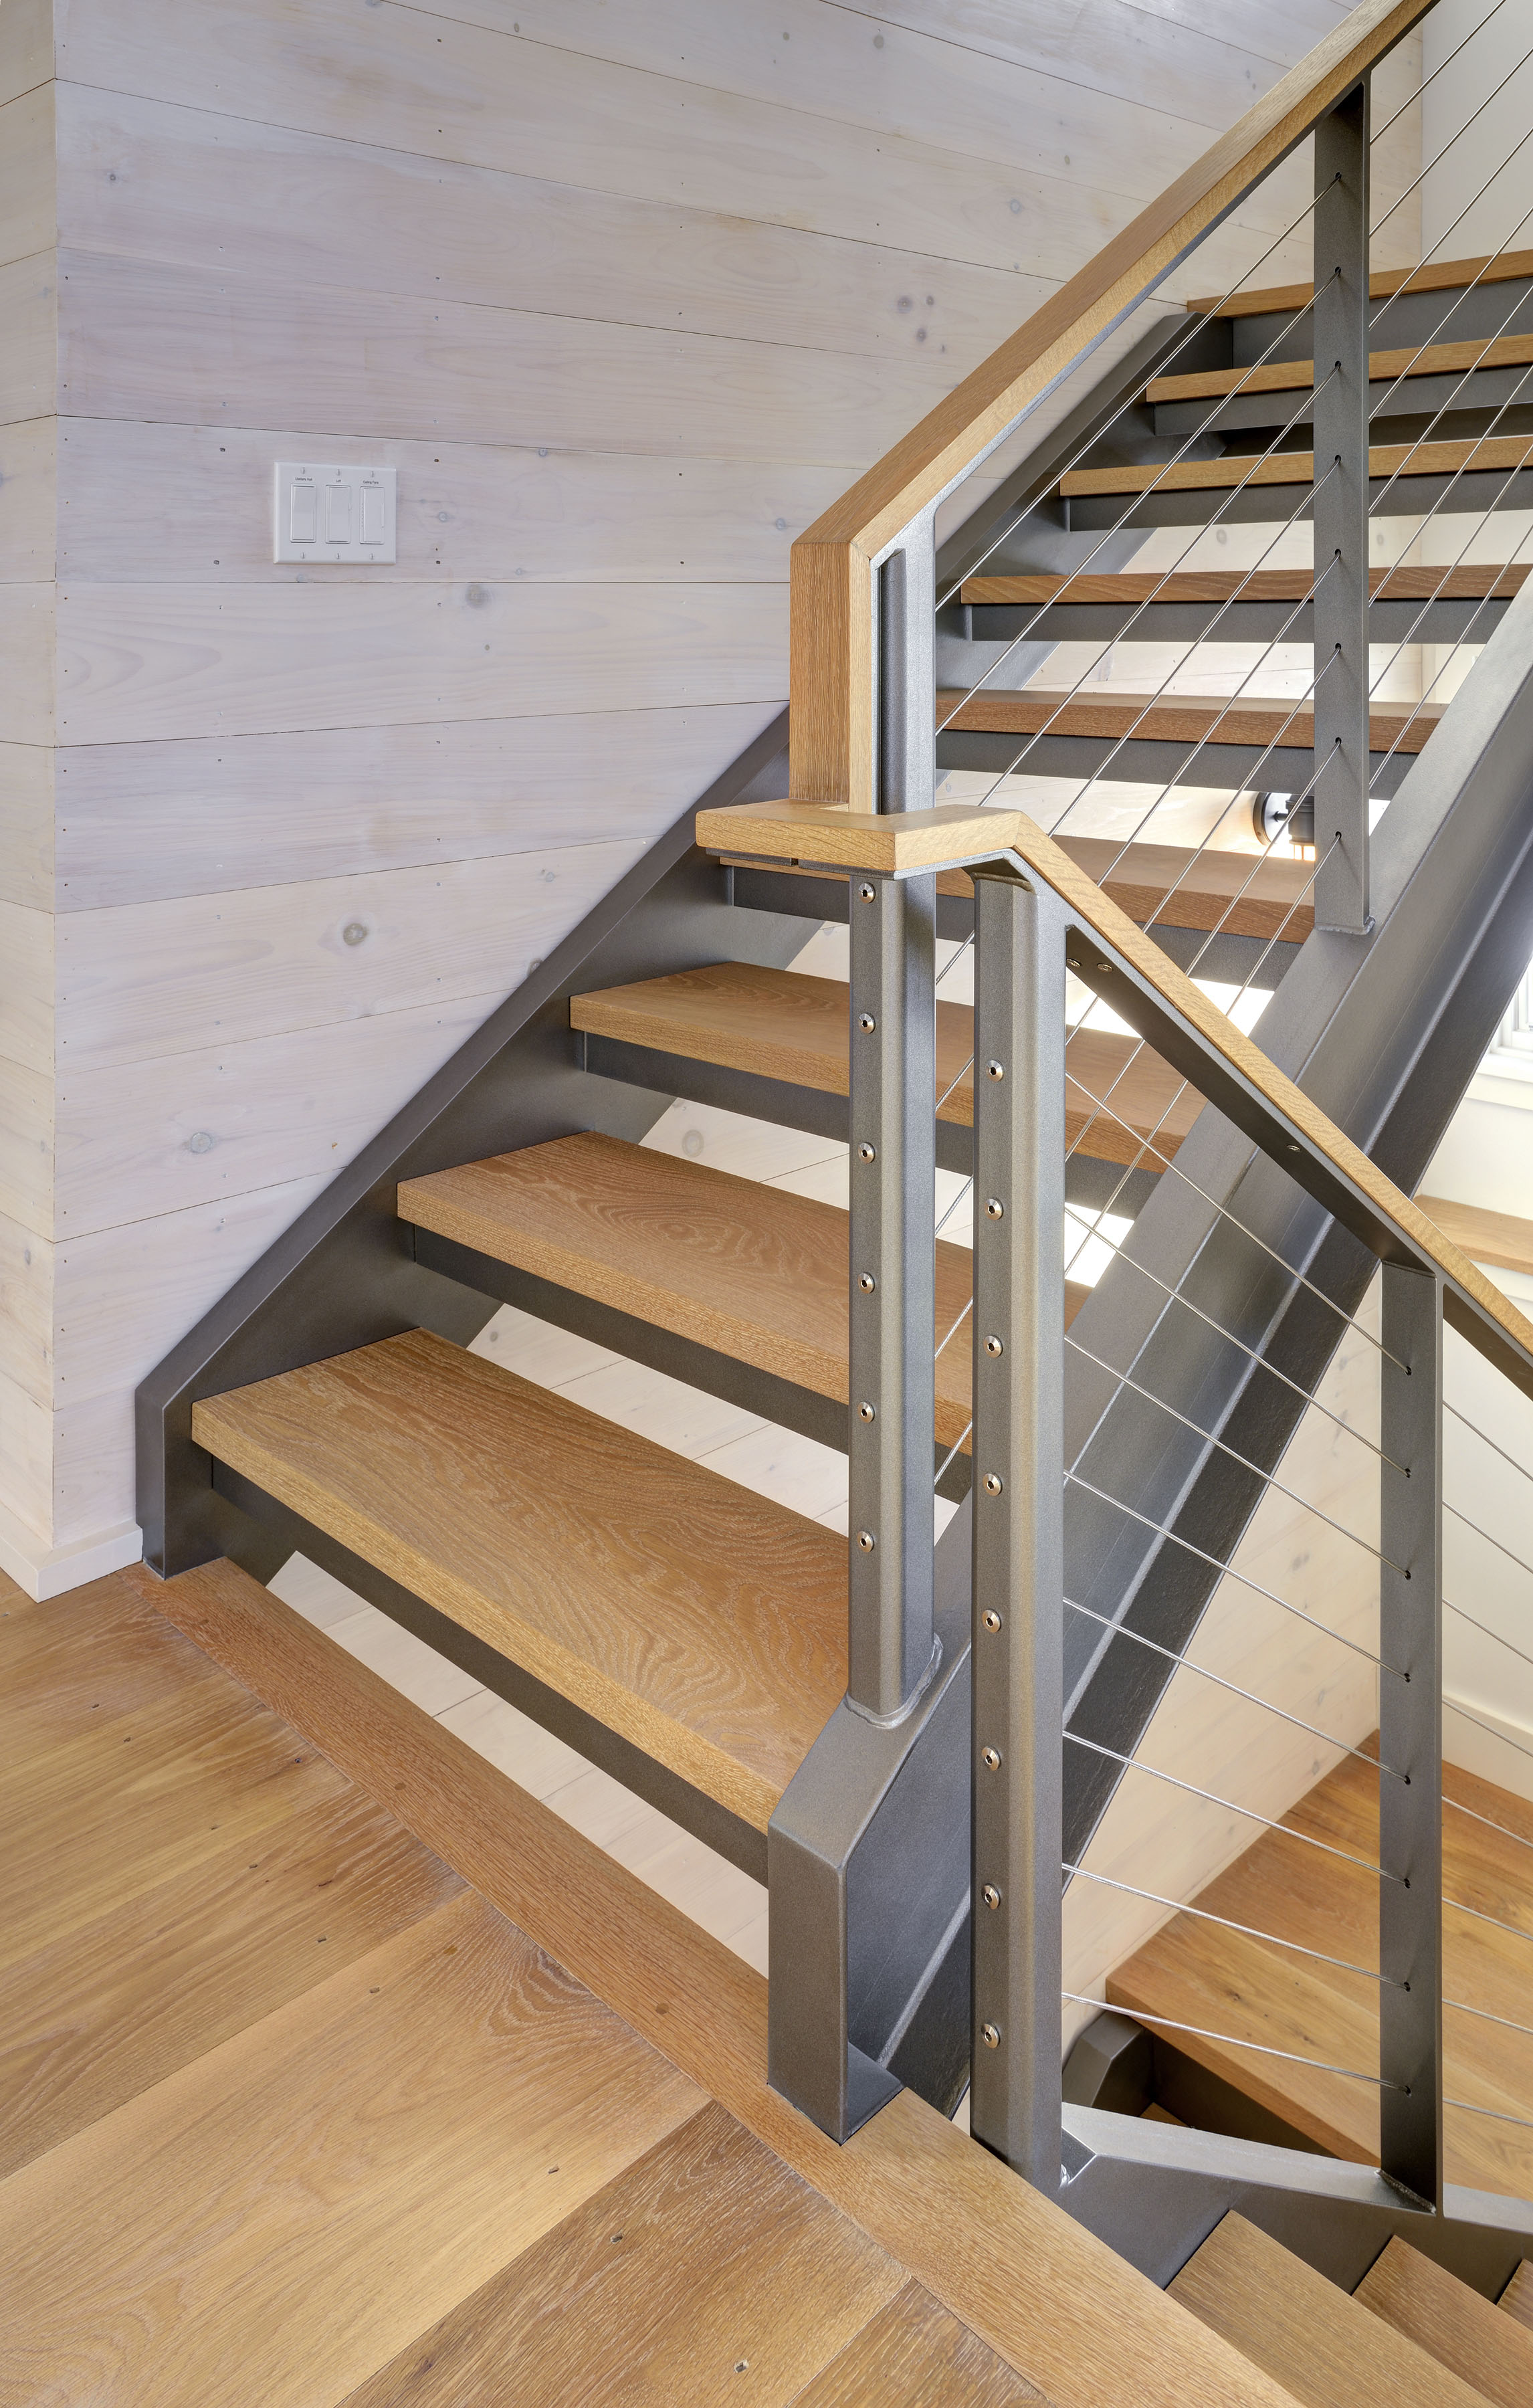 Wood handrail detail on this landing with stainless steel cables 